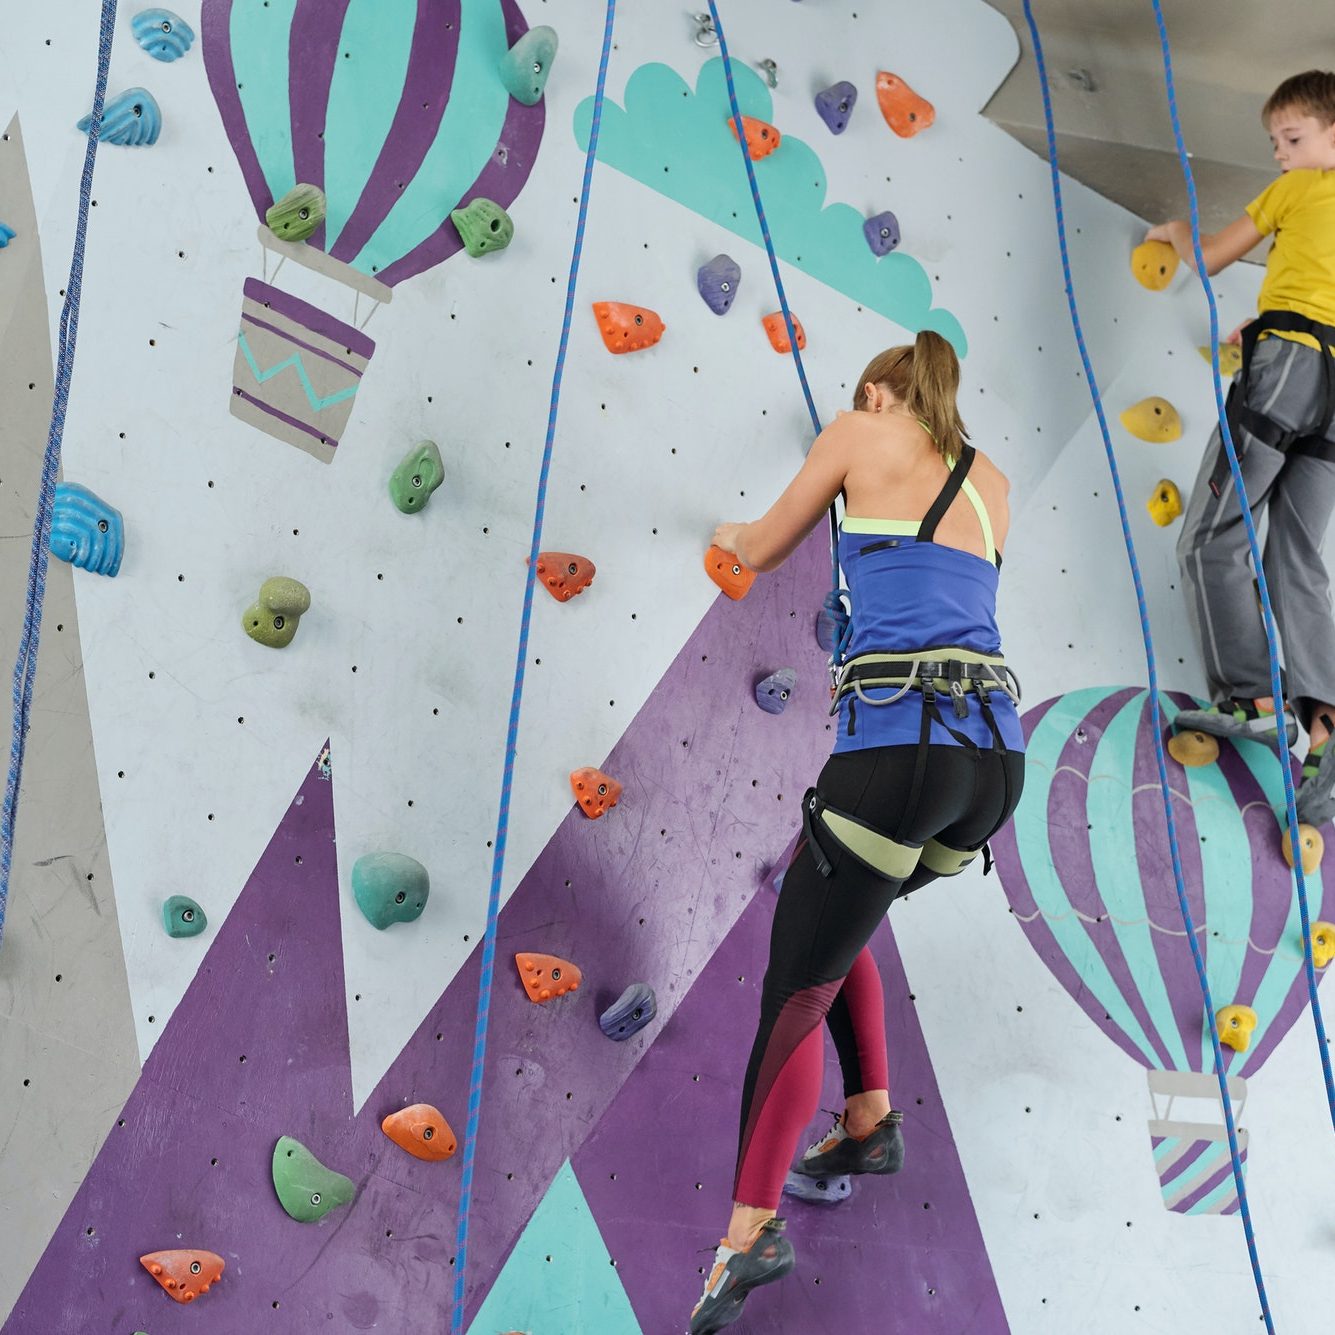 Blonde girl and schoolboy grabbing by small rocks on climbing equipment